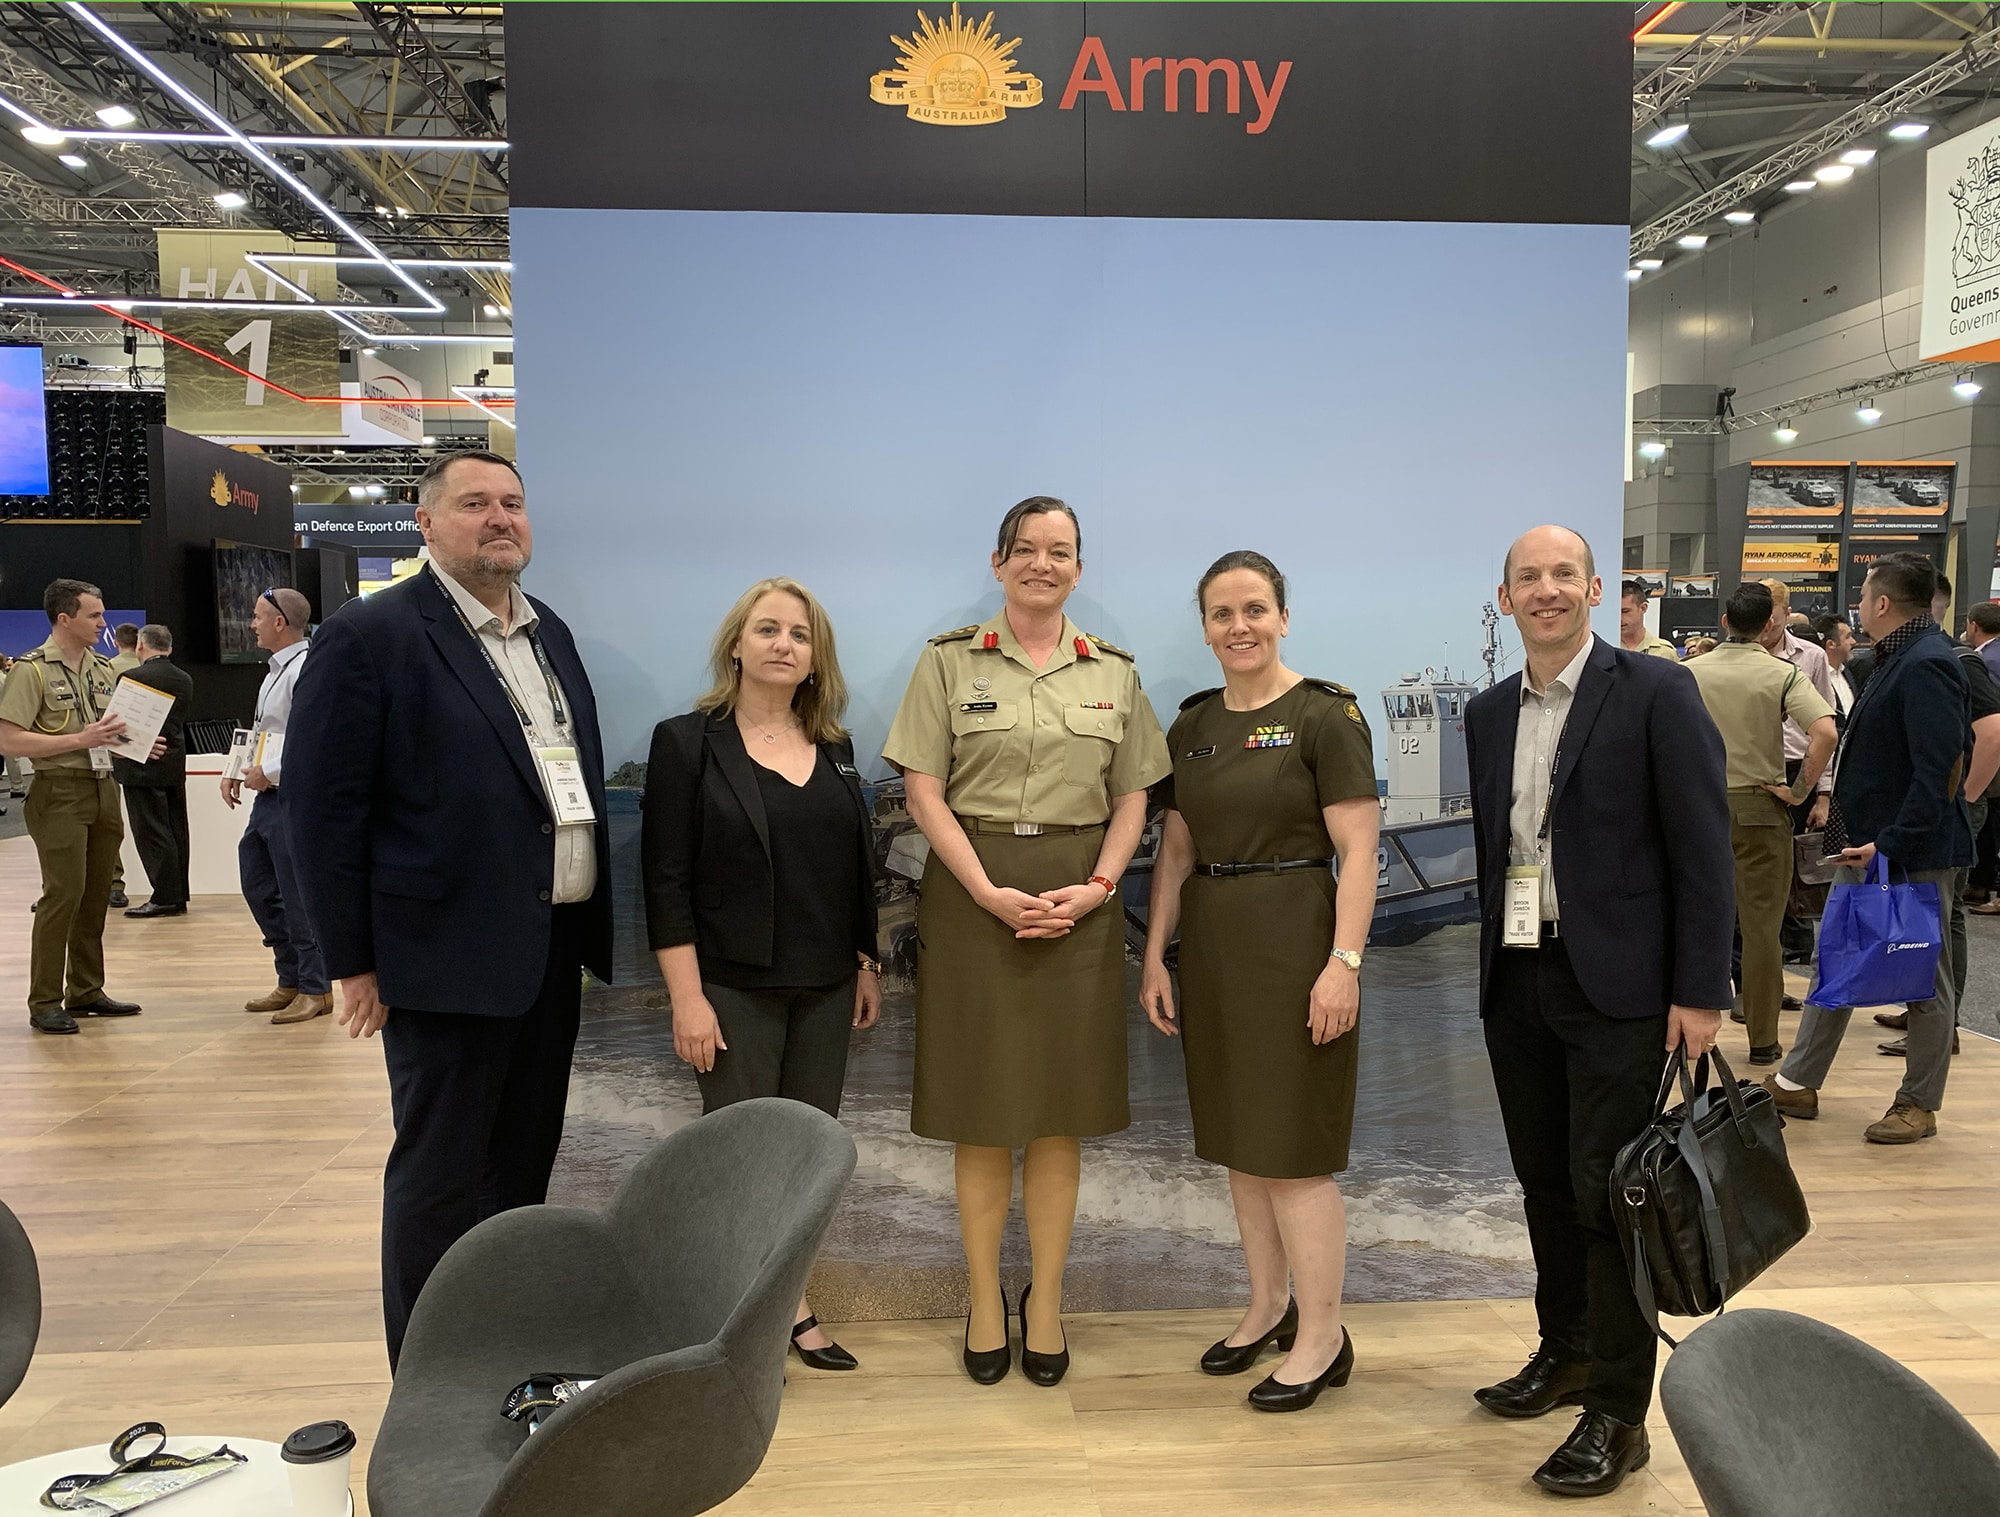 Andrew Harvey, Samantha Goodman, and Brydon Johnson Discussing Army’s future education needs with COL Jen Harris and Anita Rynne.